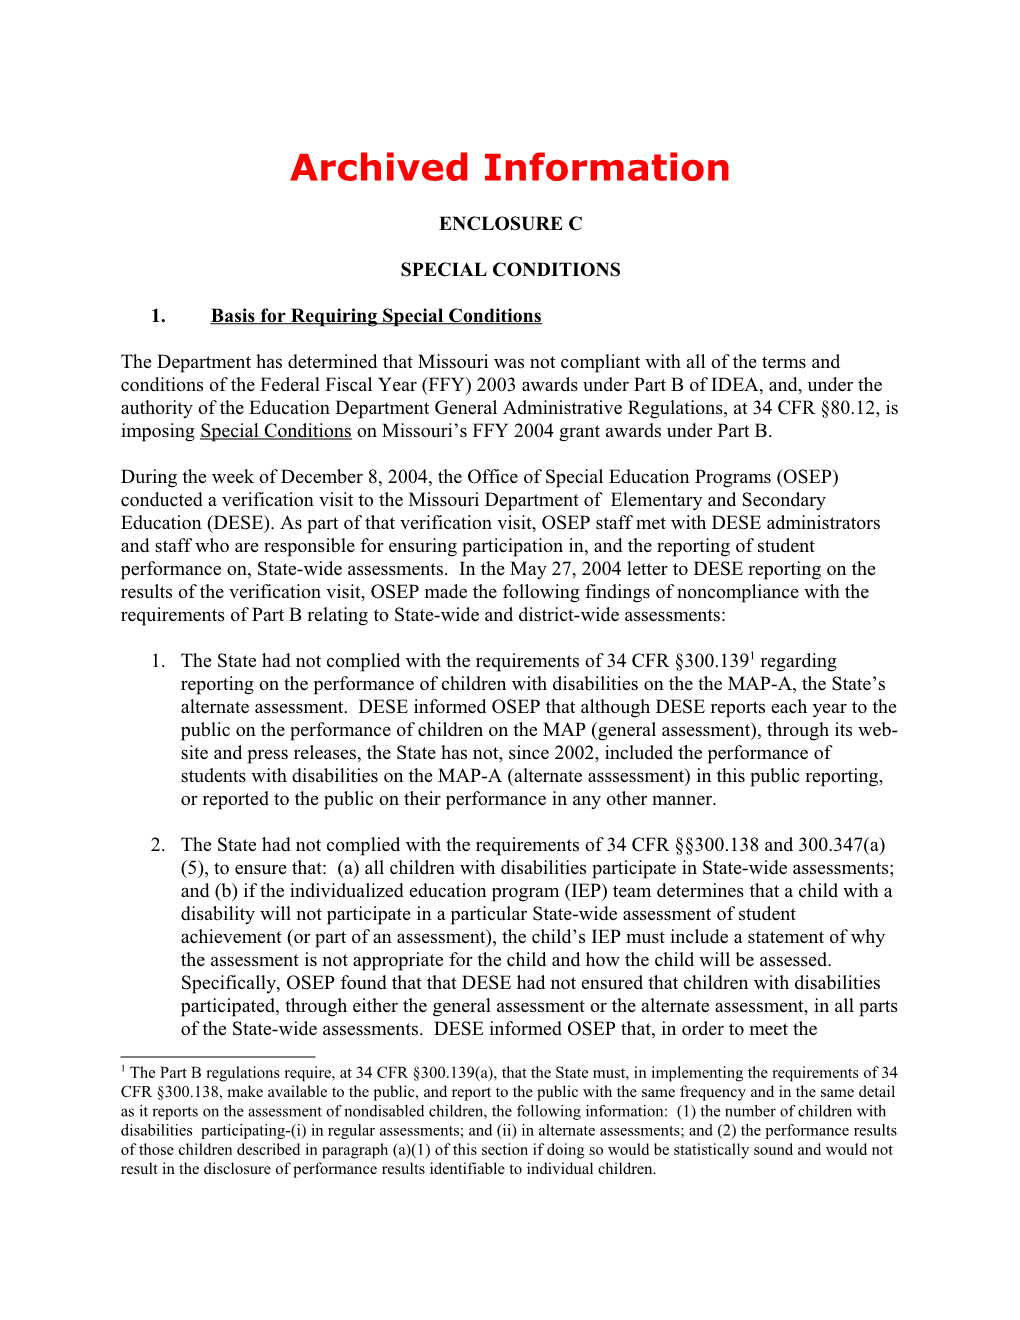 Archived Information: 2004 Missouri Individuals with Disabilities Act (IDEA) Part B Special